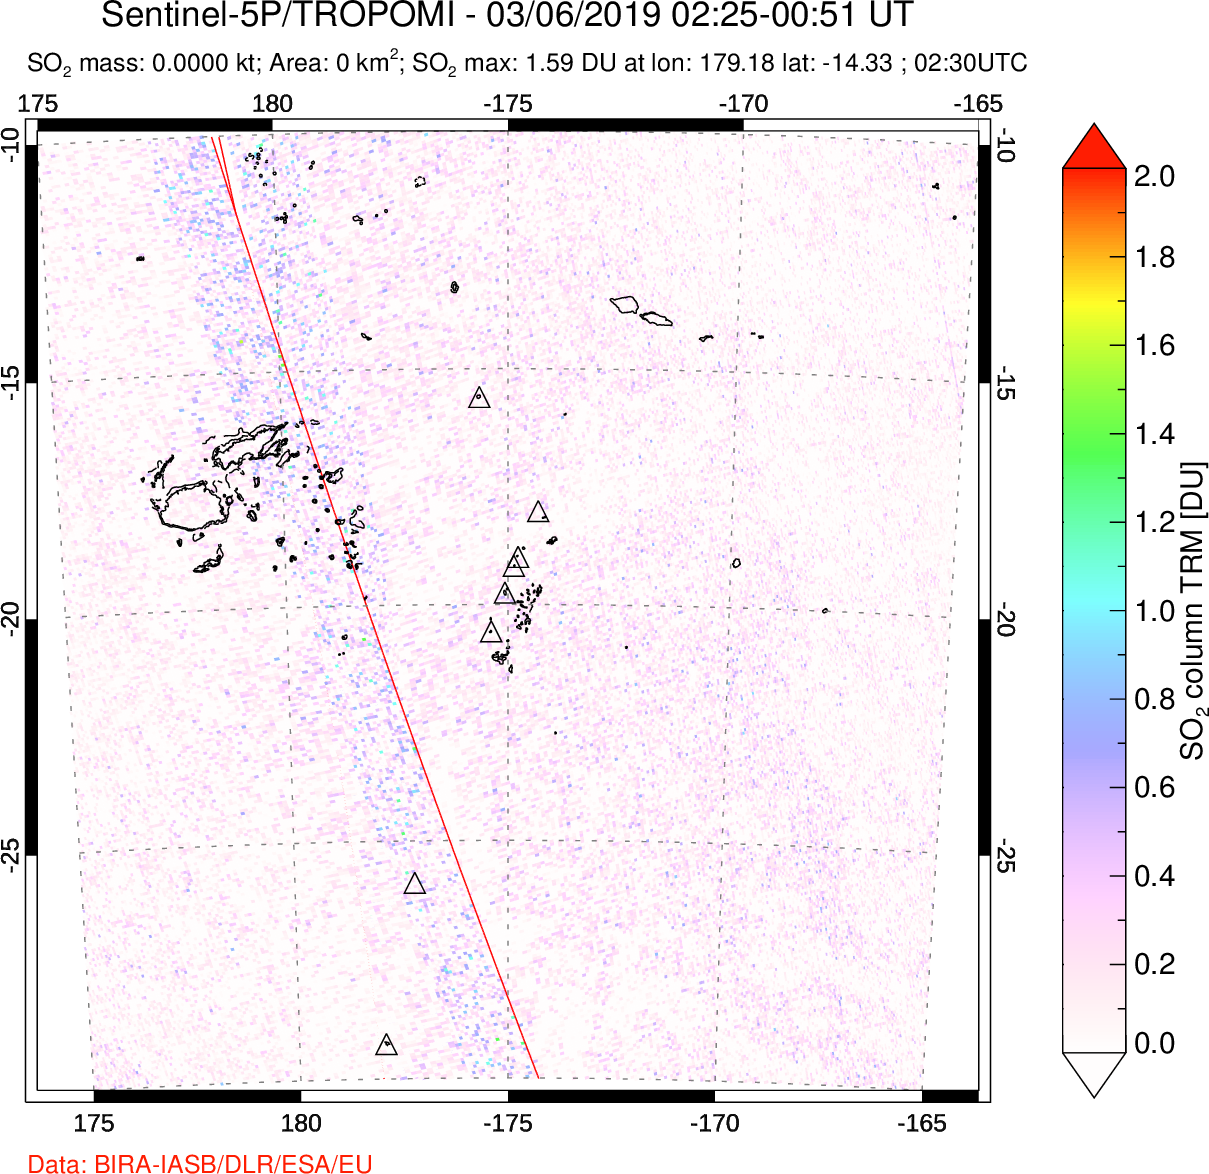 A sulfur dioxide image over Tonga, South Pacific on Mar 06, 2019.